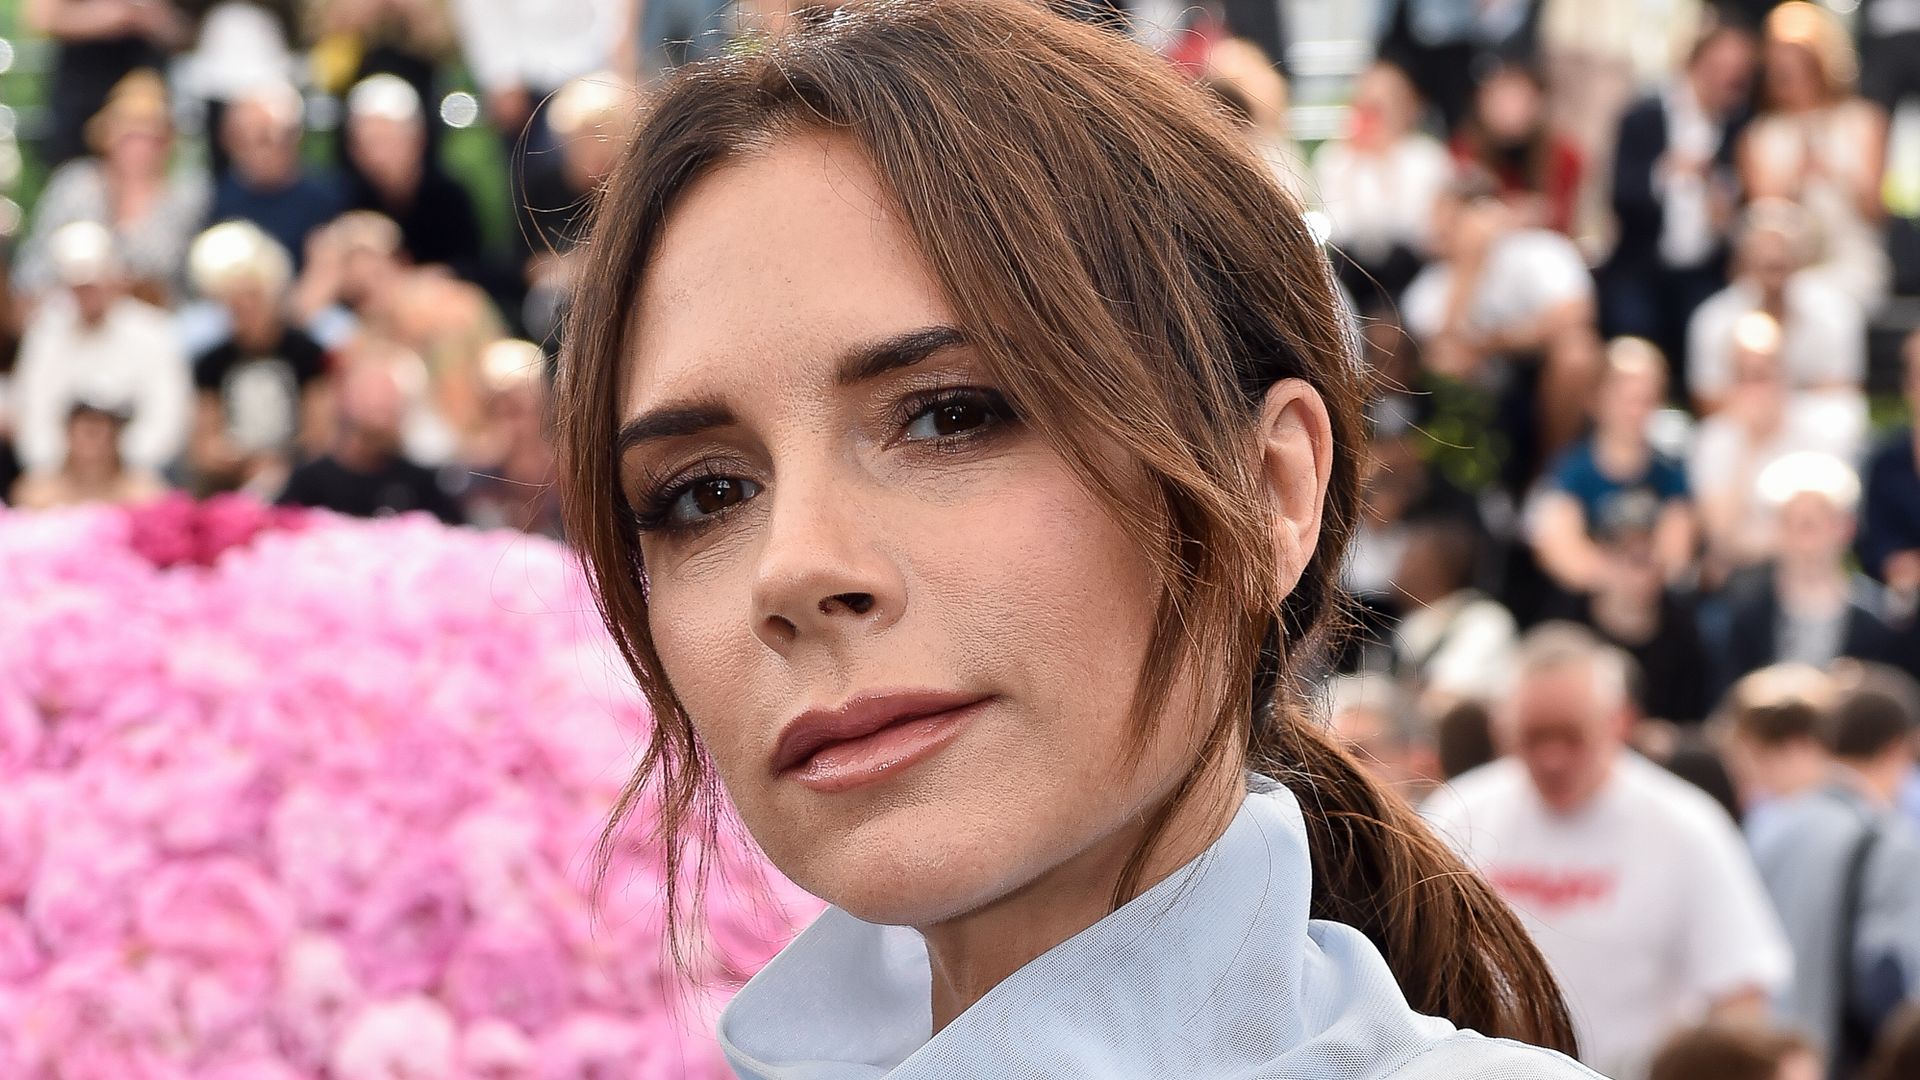  PARIS, FRANCE - JUNE 23:  Victoria Beckham attends the Dior Homme Menswear Spring/Summer 2019 show as part of Paris Fashion Week on June 23, 2018 in Paris, France.  (Photo by Dominique Charriau/WireImage)